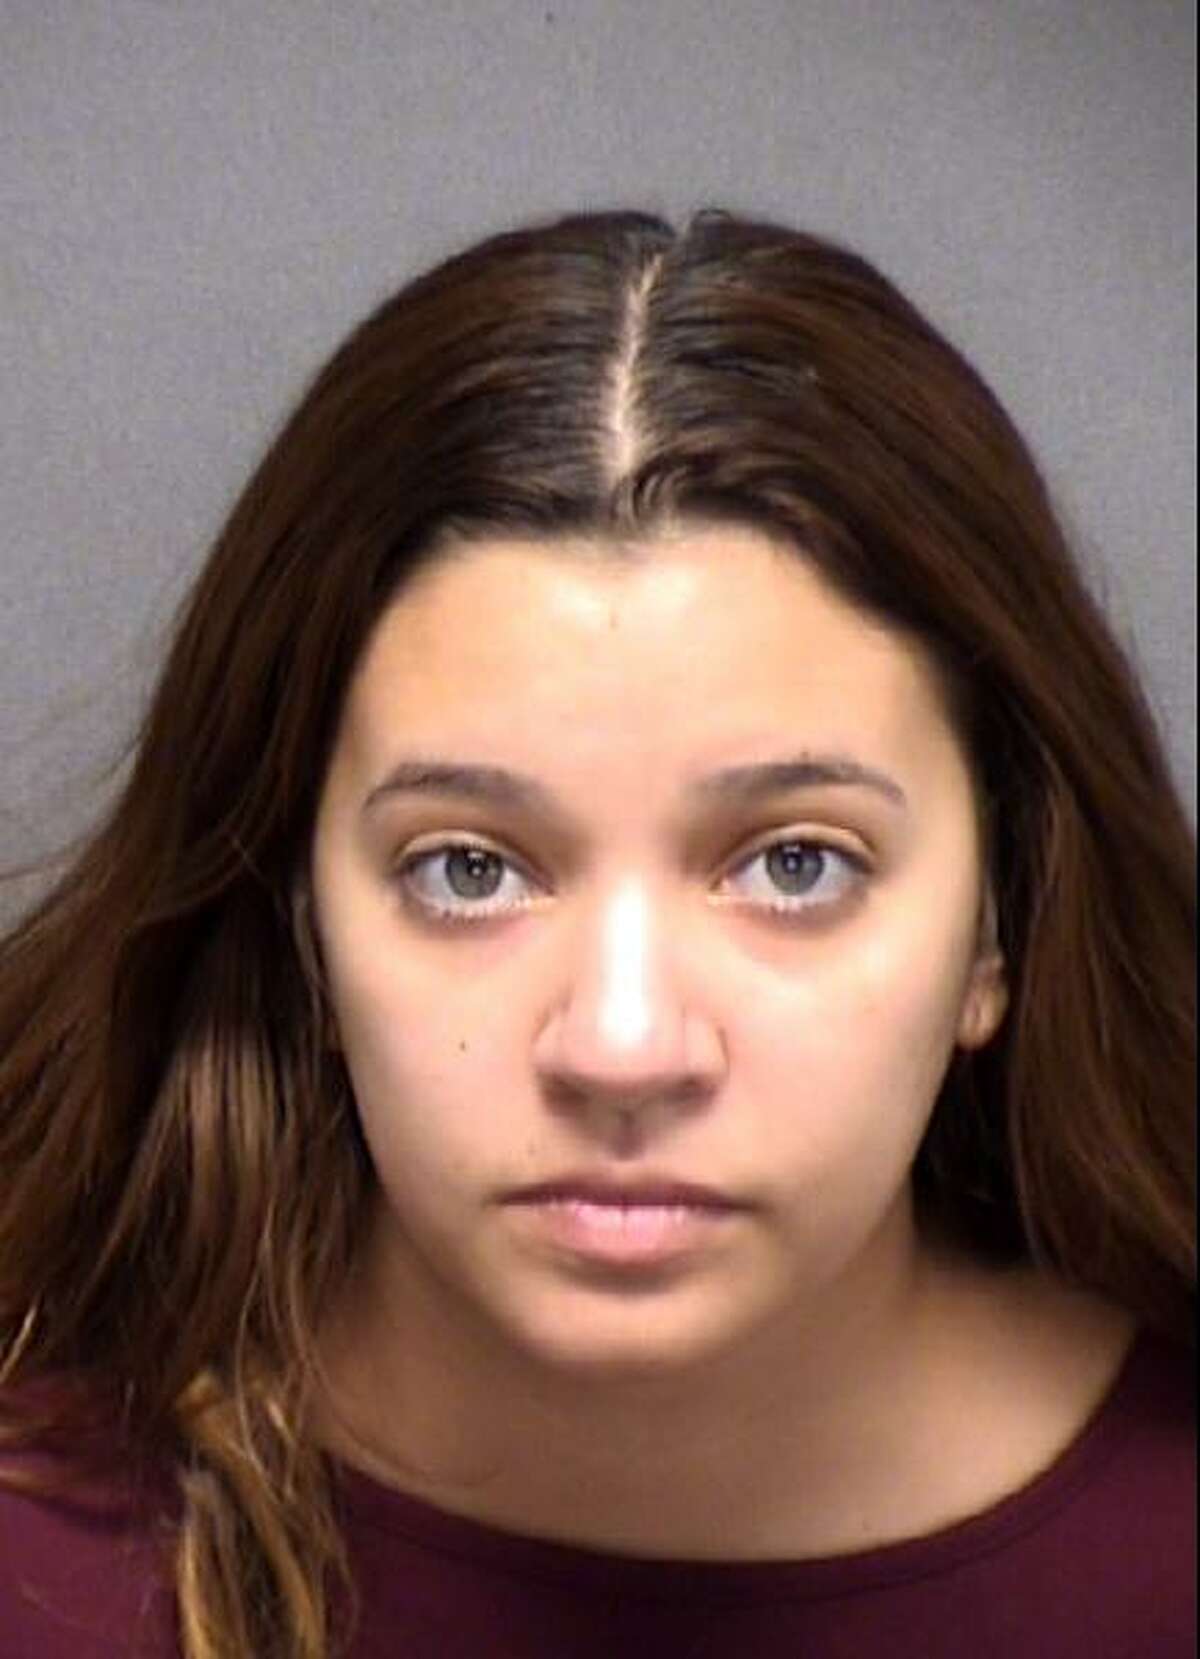 Samantha Leigh Castillo is charged with intoxication manslaughter in the death of Beatrice Gonzalez, 44, who was hit by a car while she rode her bicycle in April. Castillo and the bar where she is alleged to have been drinking now are defendants in a $20 million wrongful death lawsuit.